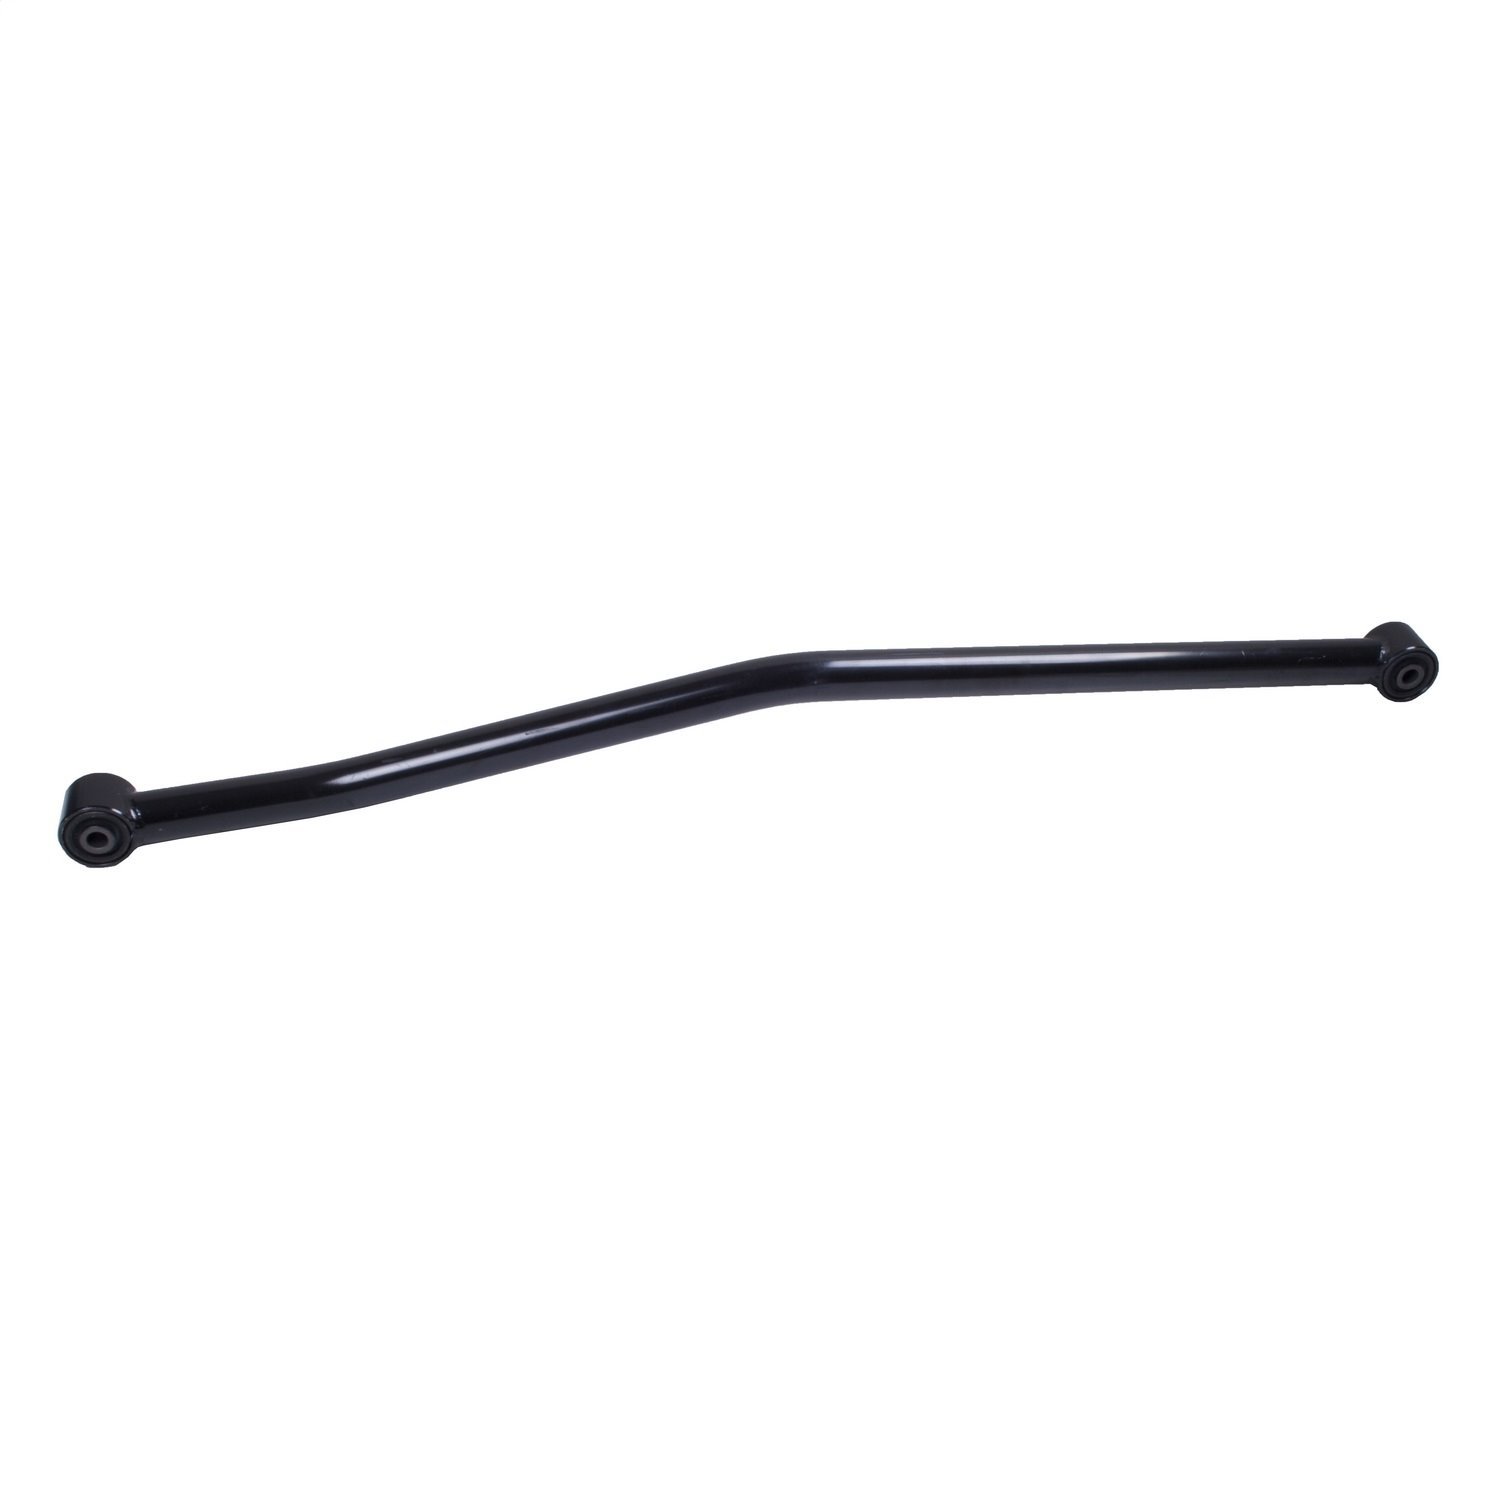 Replacement rear track bar from Omix-ADA, Fits 87-95 Jeep Wrangler YJIt is non-adjustable.